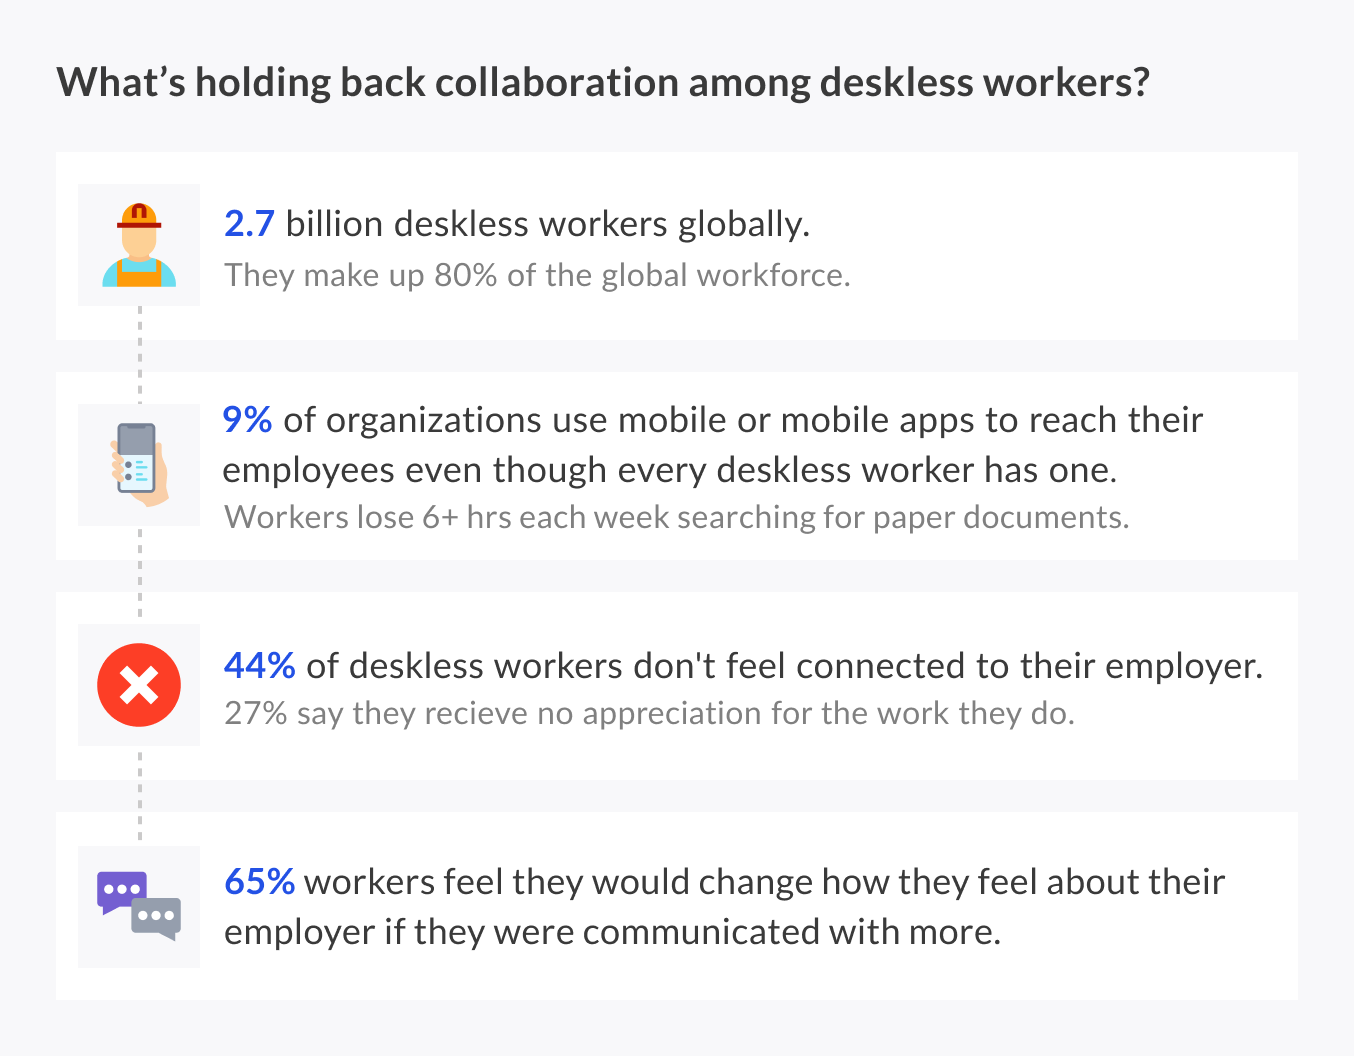 What's holding back collaboration among deskless workers?